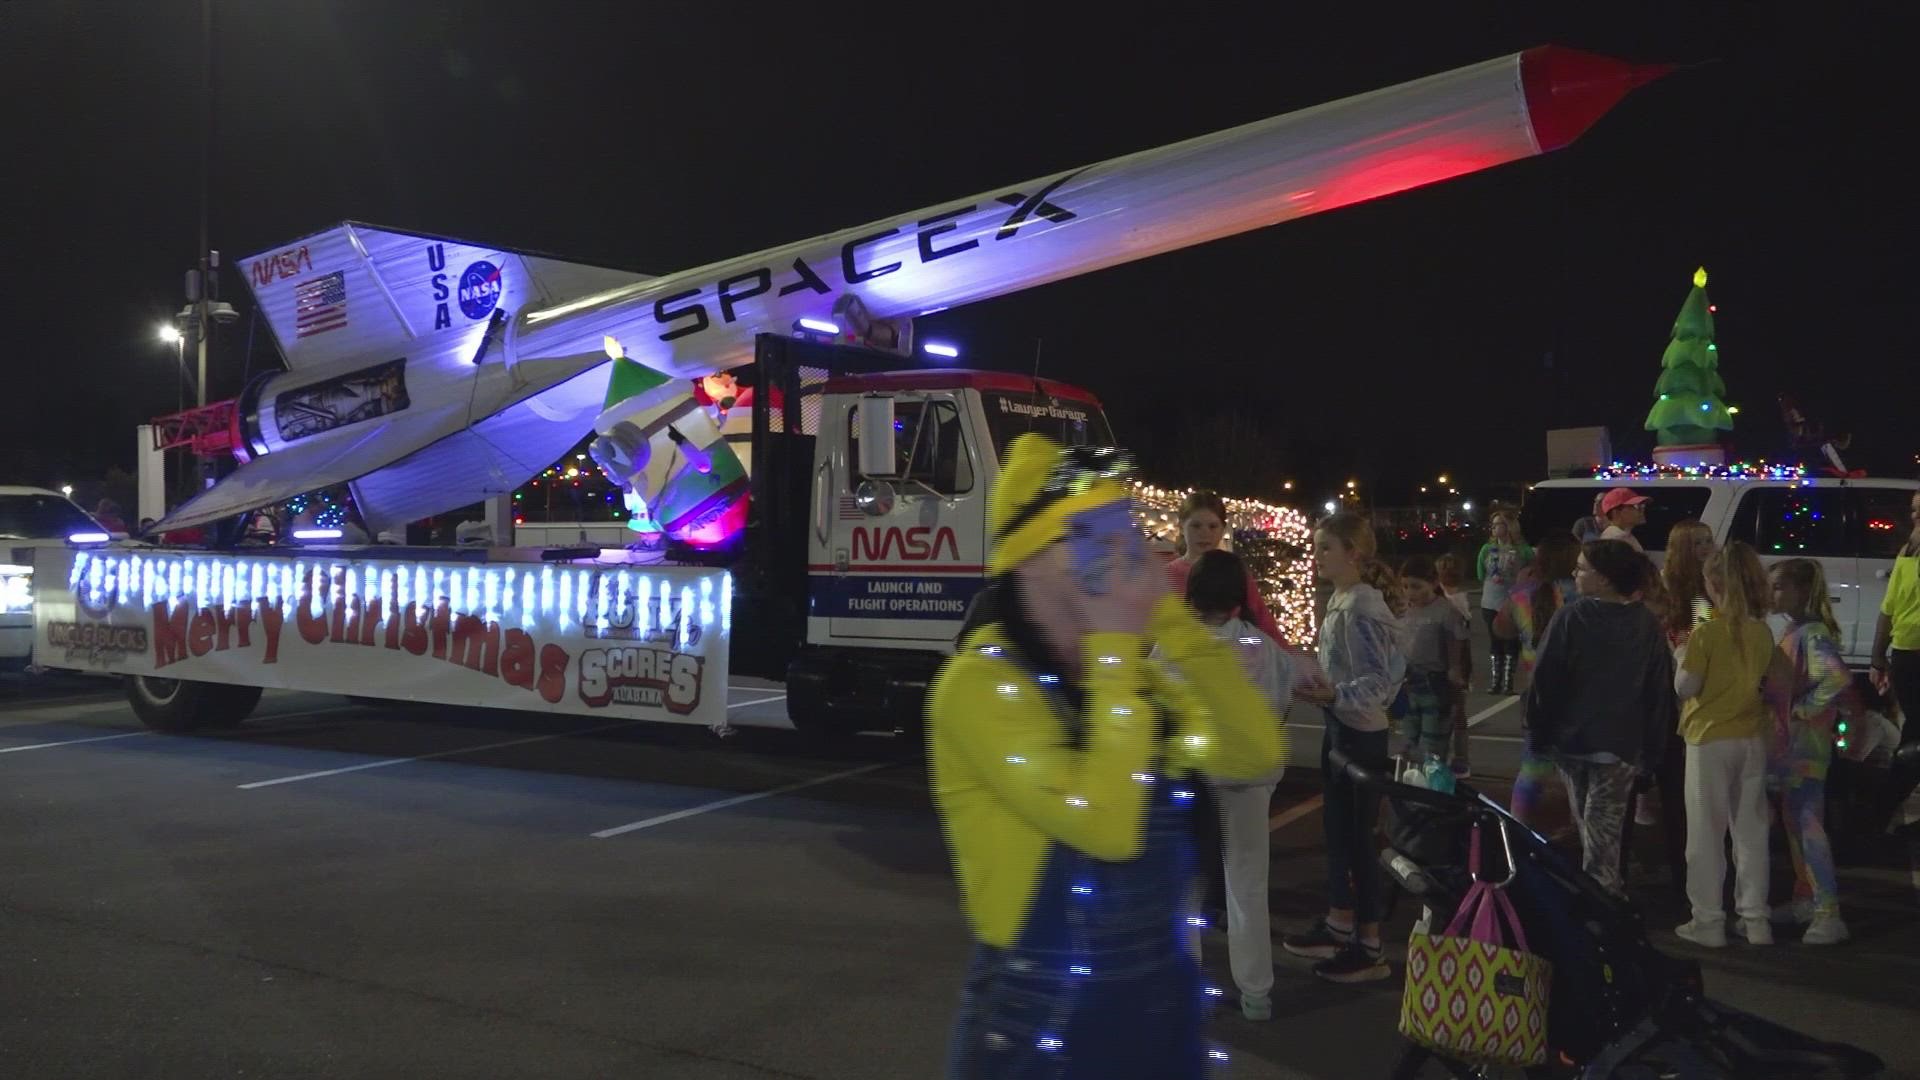 Local children's theatre group, diverse marching krewe and Elvis impersonator, and more attend this year's Huntsville Christmas Parade.